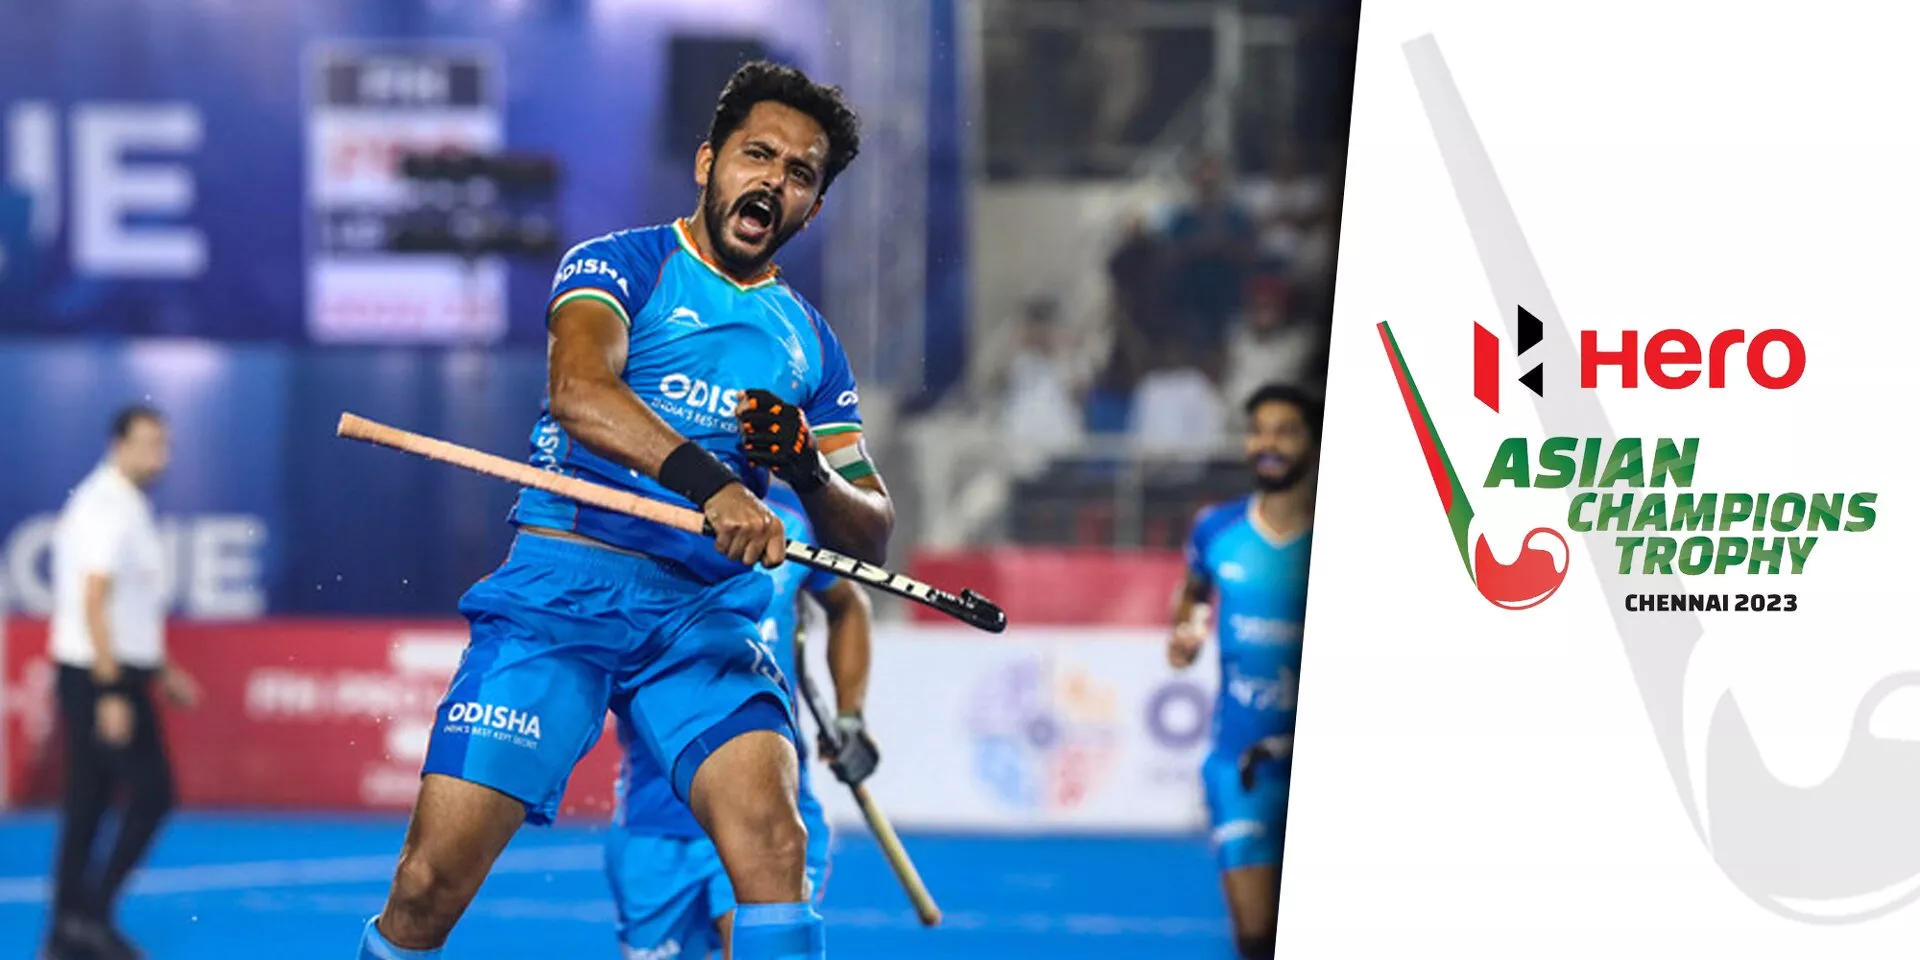 Where and how to watch hockey Asian Champions Trophy 2023 live in India?